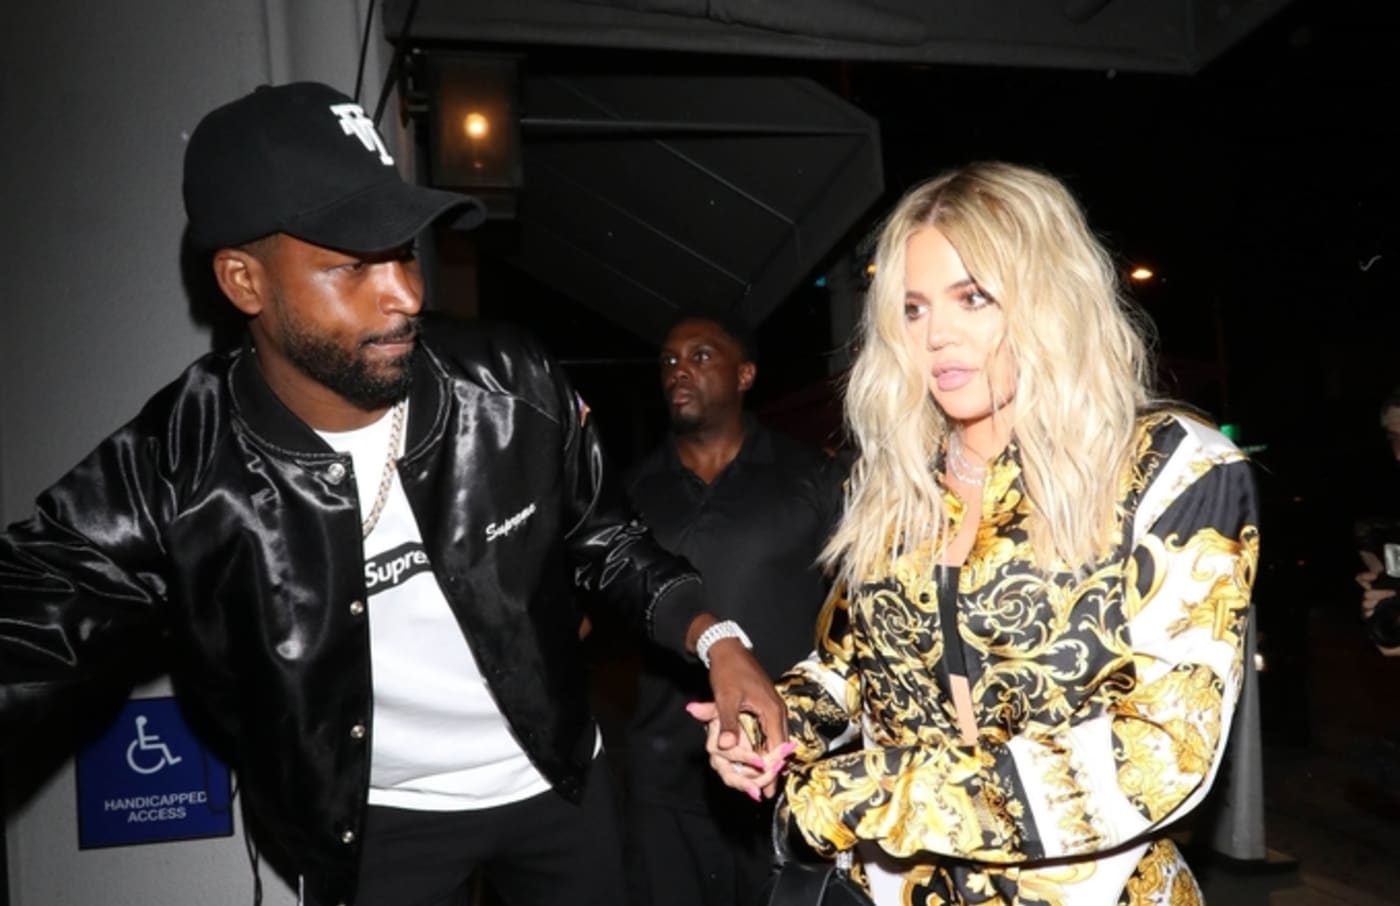 Khloé Kardashian Denies Claims She Cheated With Thompson While He Was With Ex | Complex